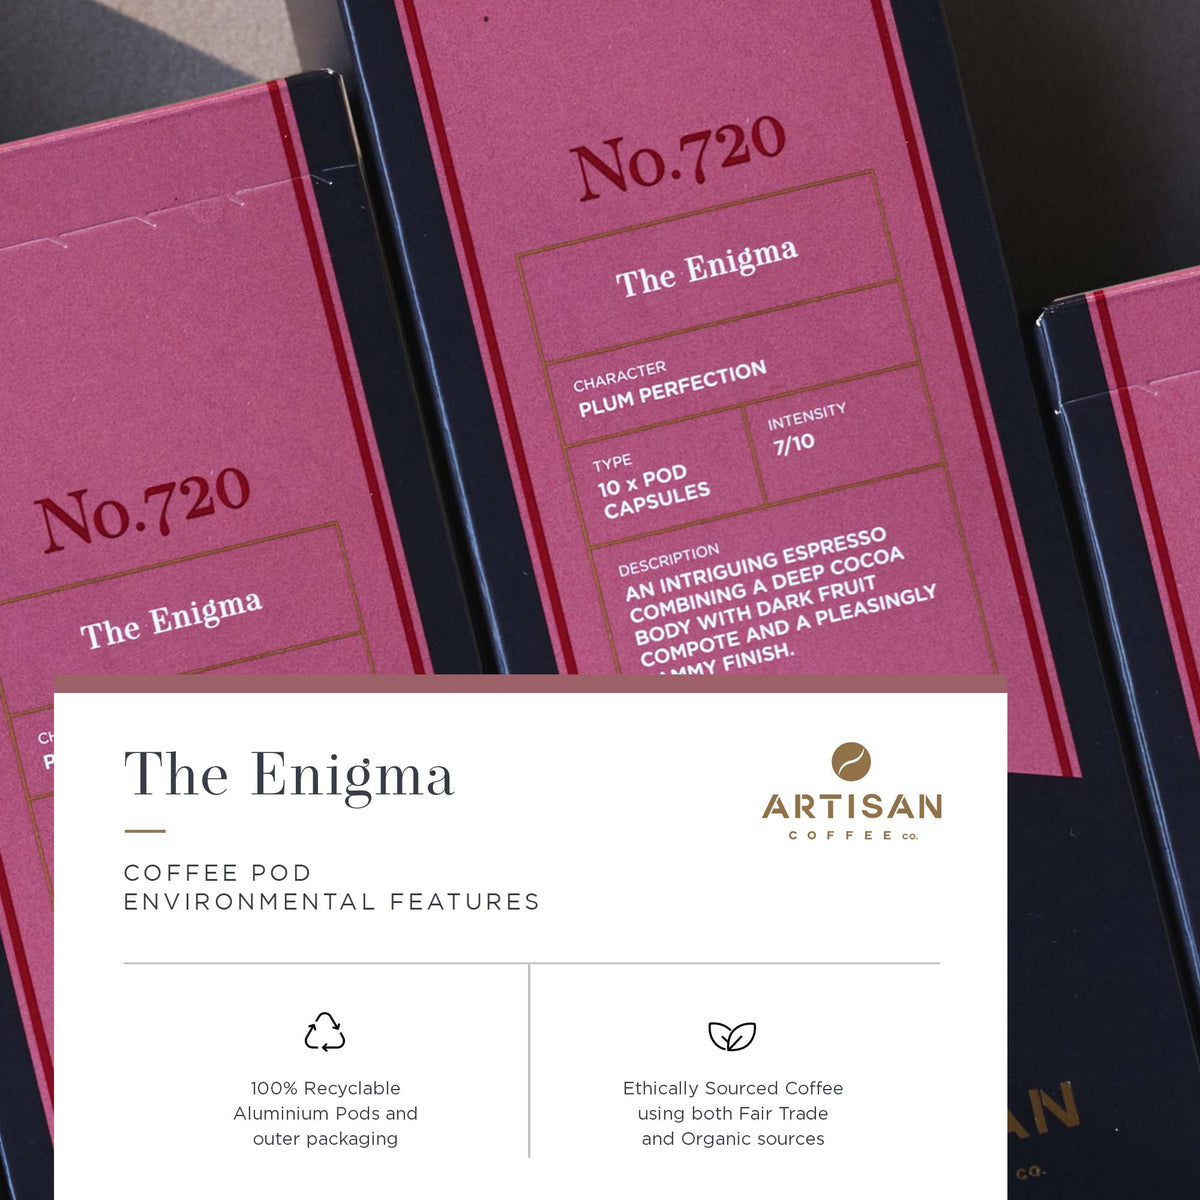 Artisan Coffee Co The Enigma Pods Infographic Environmental features